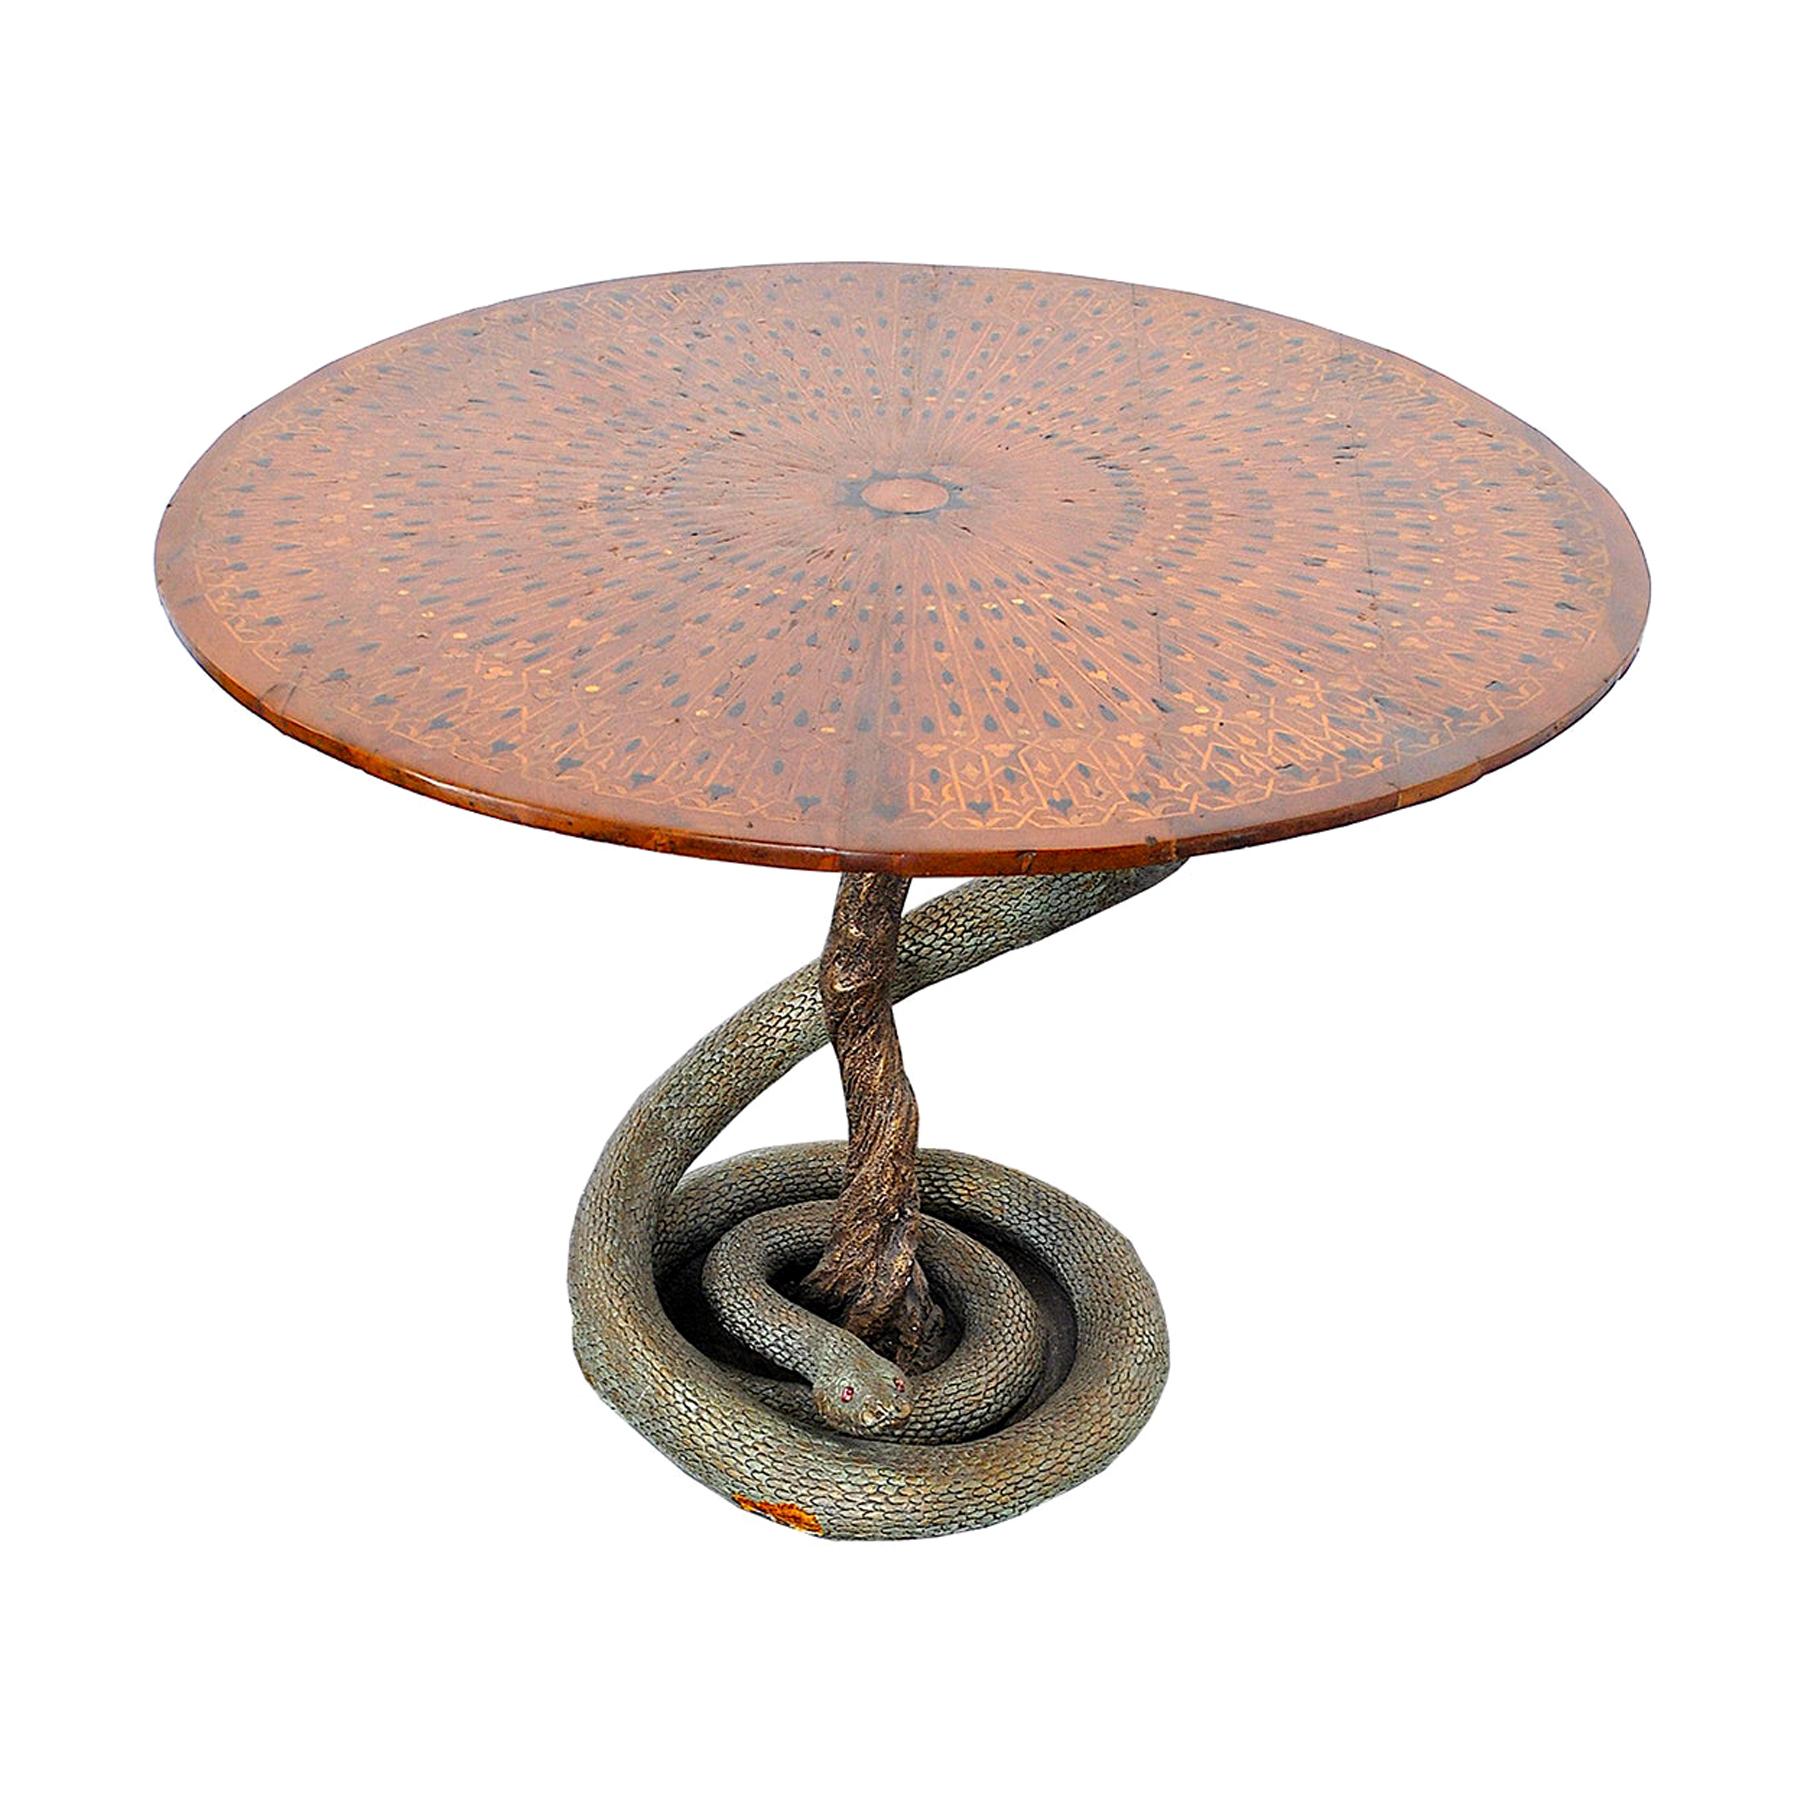 Eclectic Game Table with Python Sculpture from the Fifties